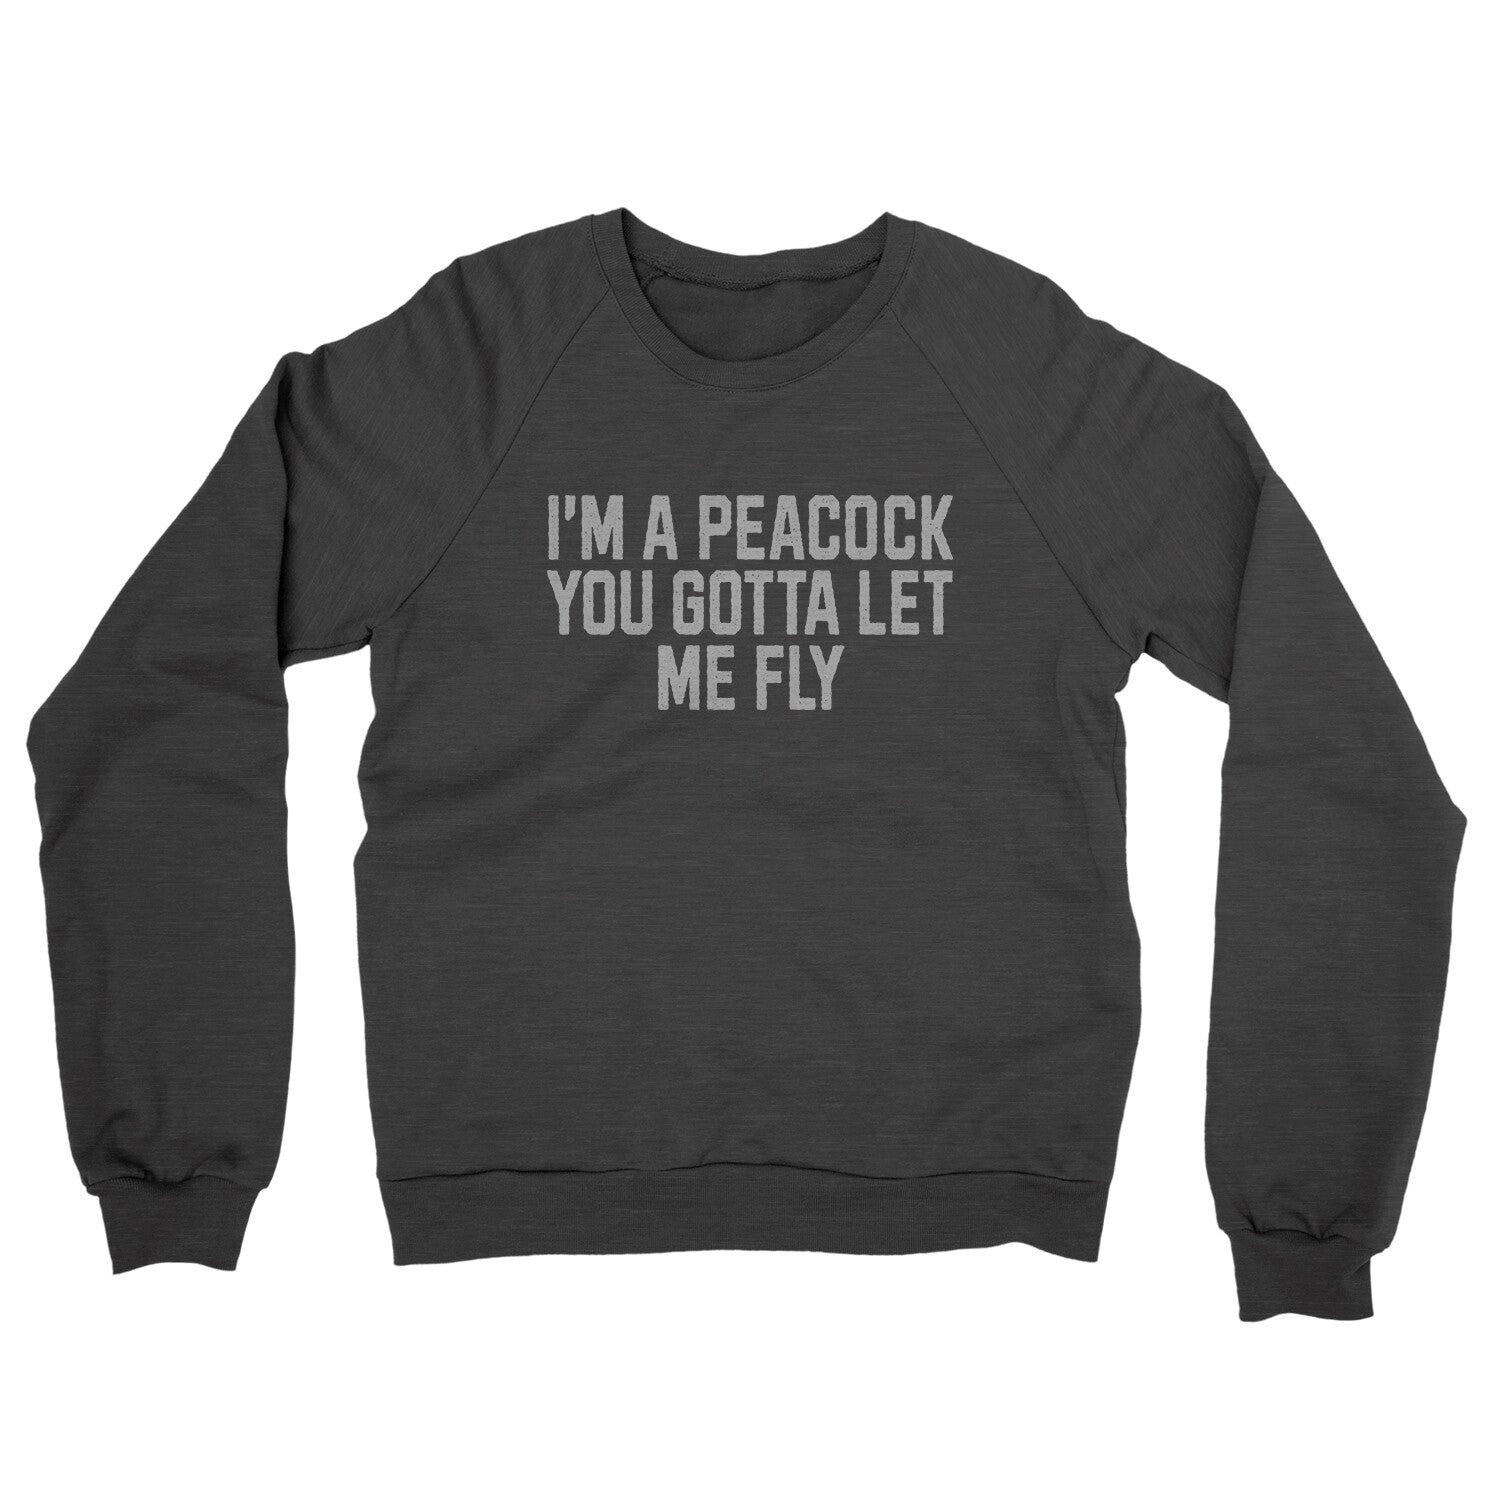 I'm a Peacock You Gotta Let me Fly in Charcoal Heather Color